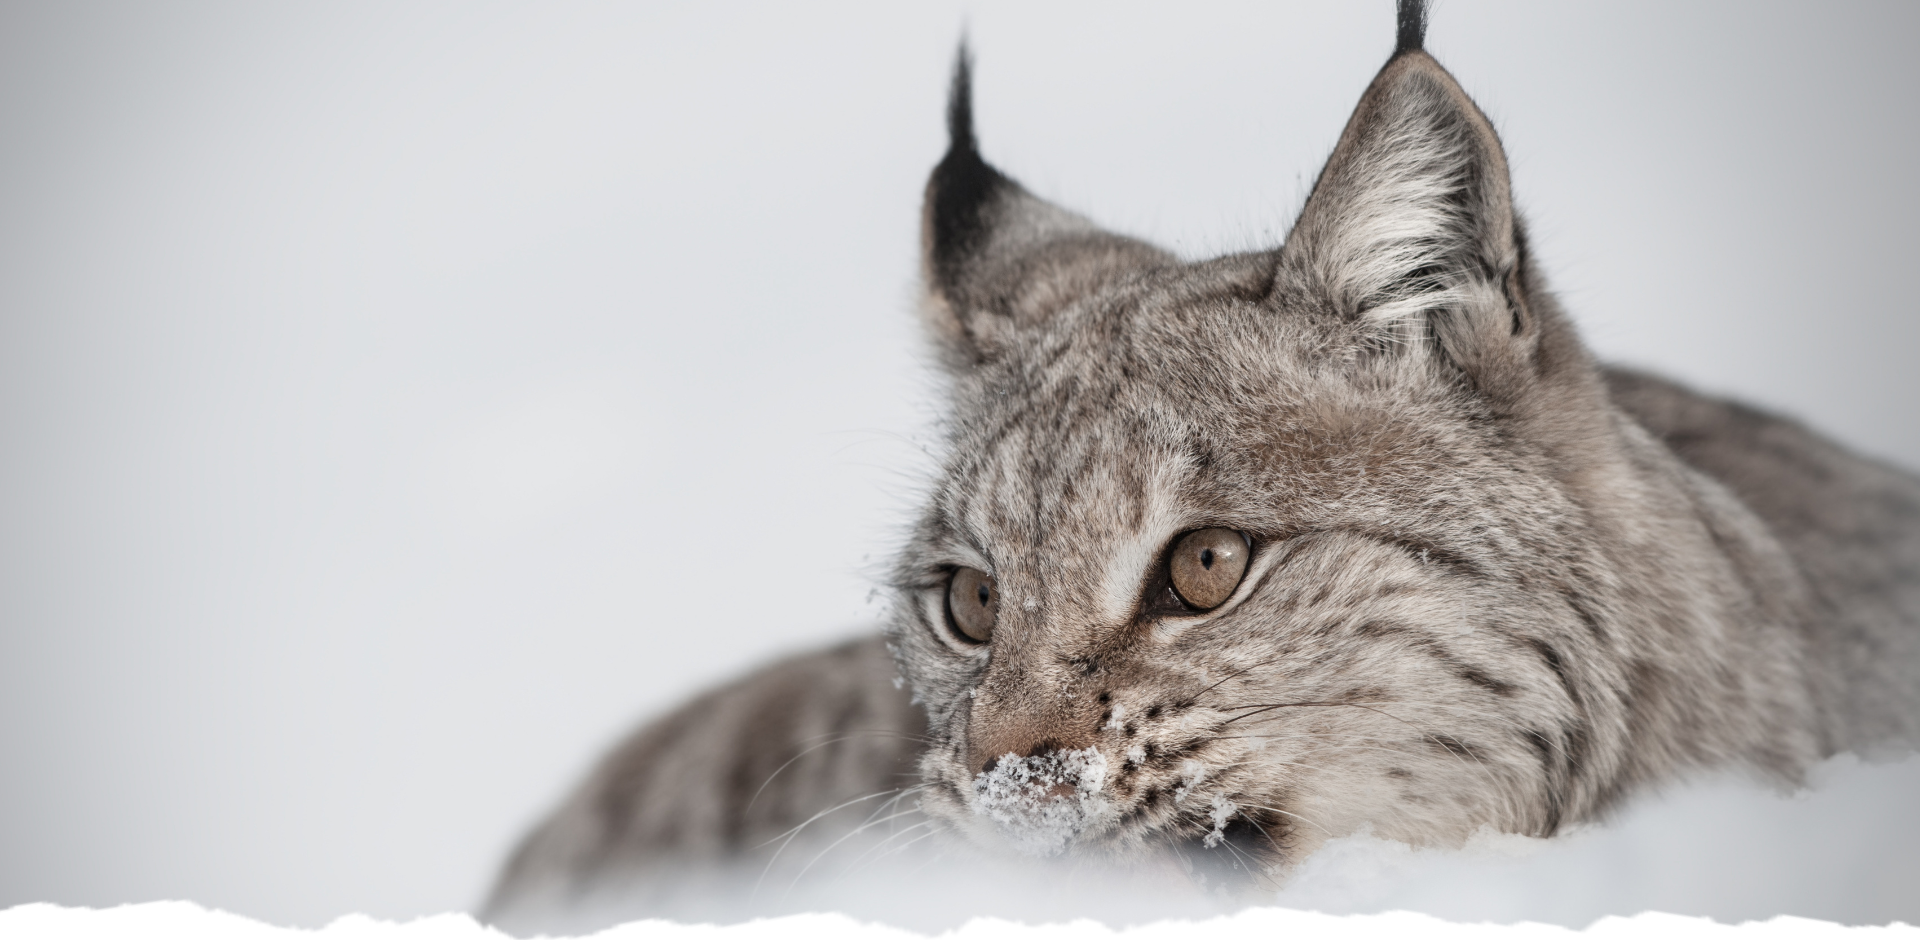 Closeup of a bobcat or lynx out in the snow.